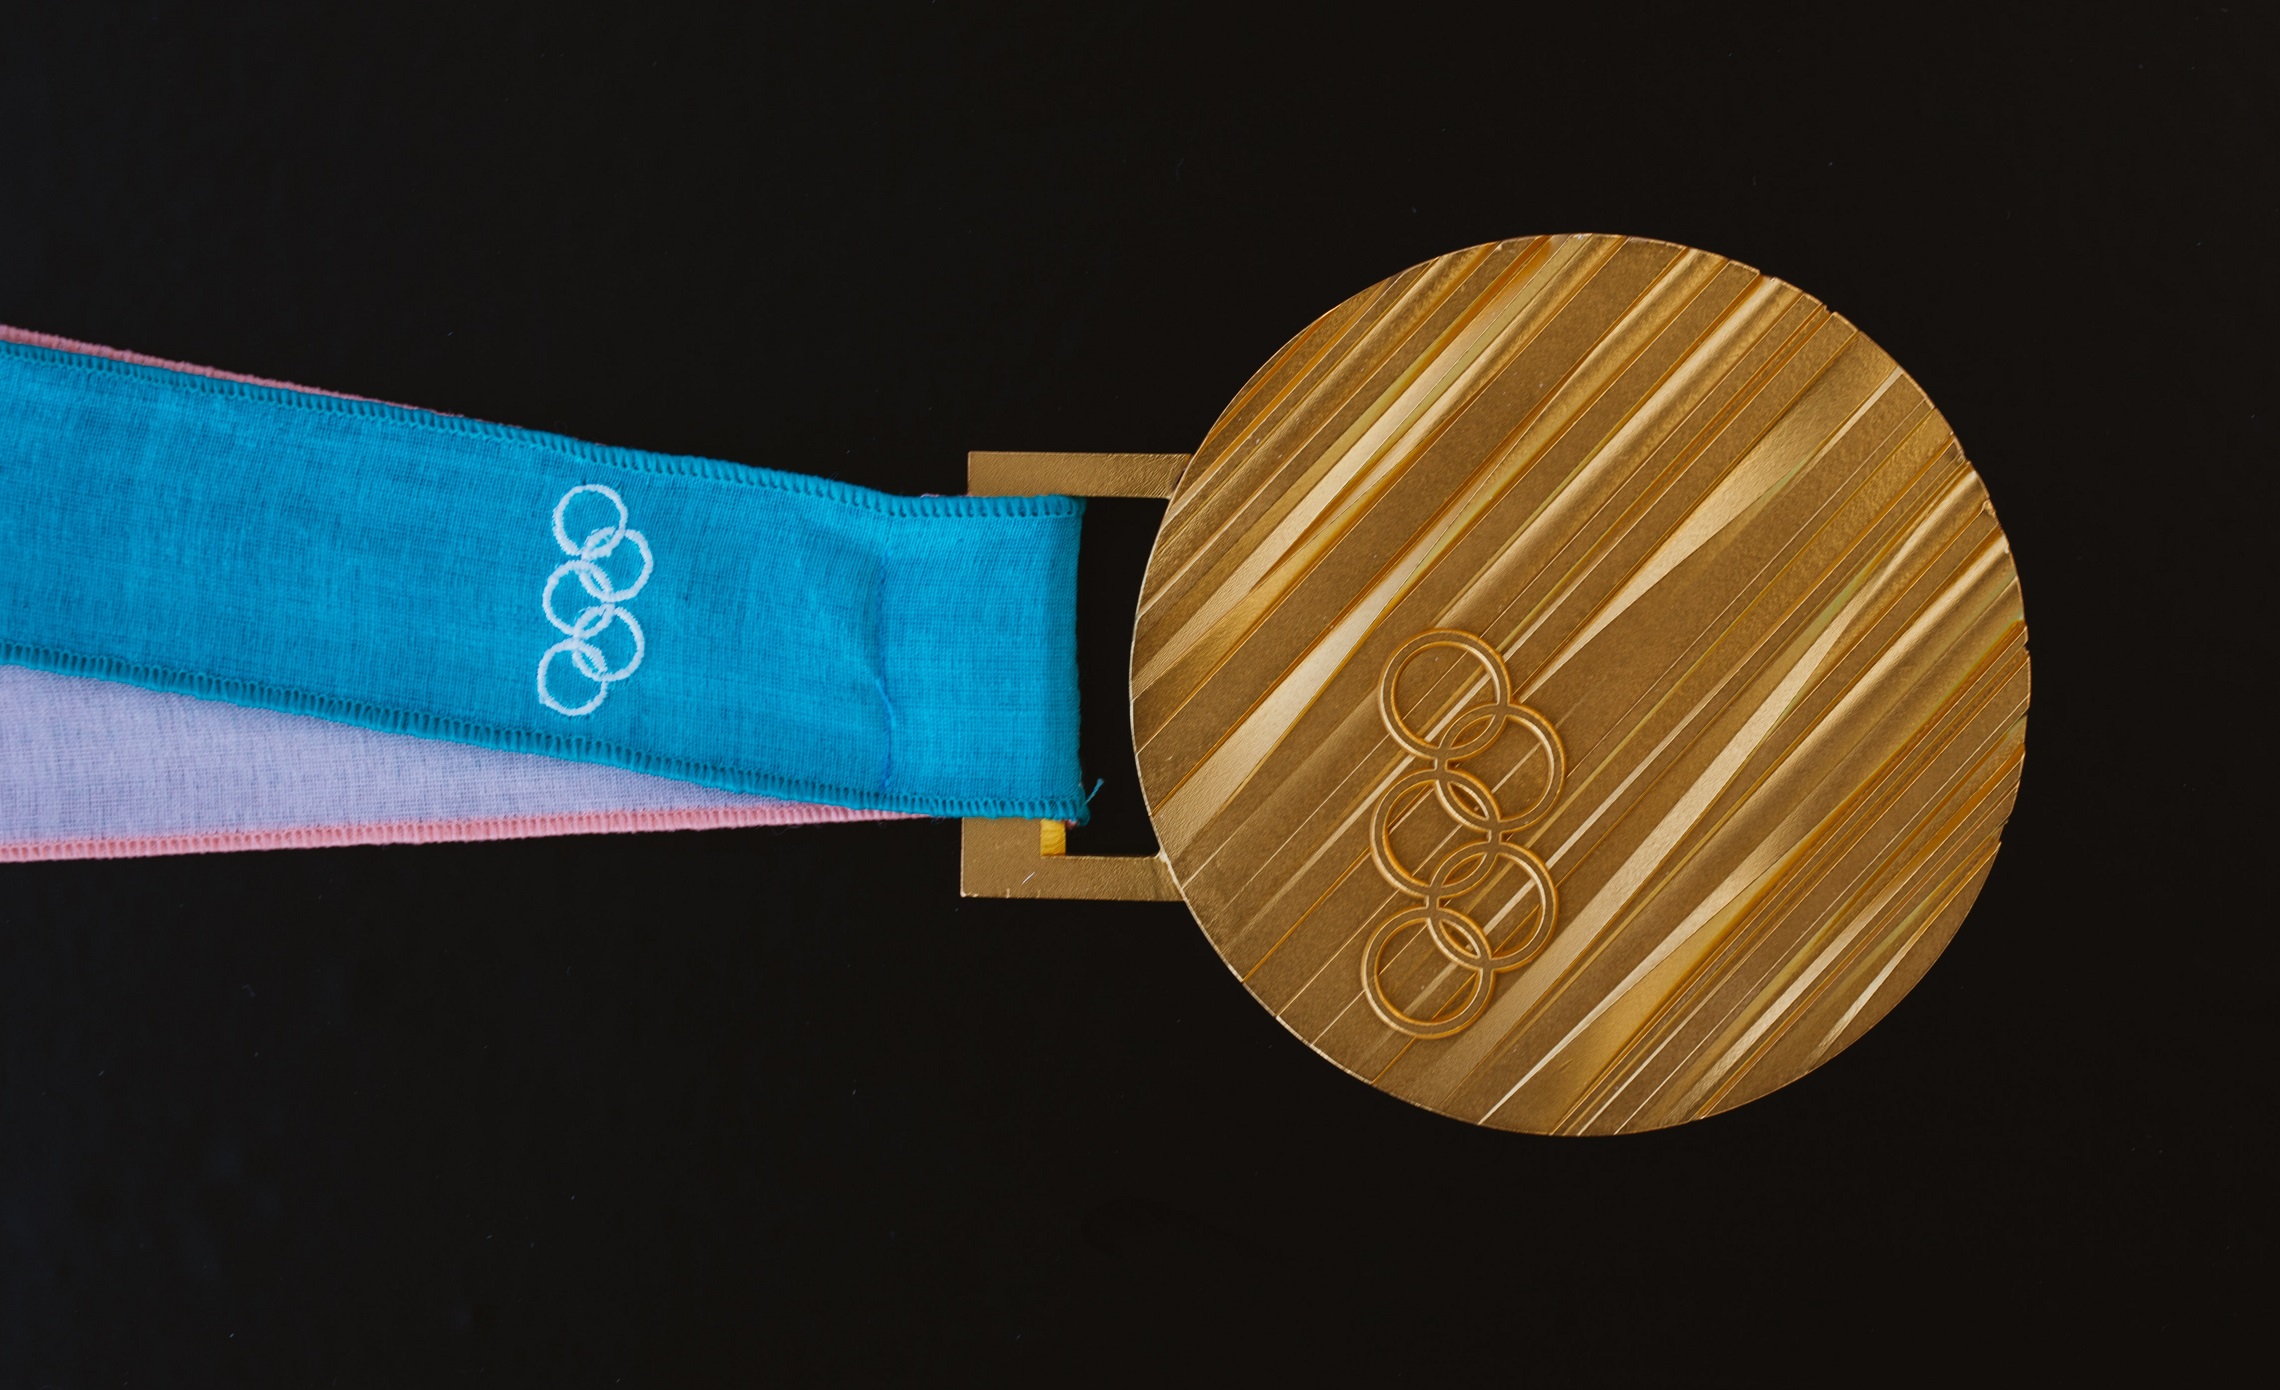 How Much Is An Olympic Gold Medal Worth? Impersonal Finances